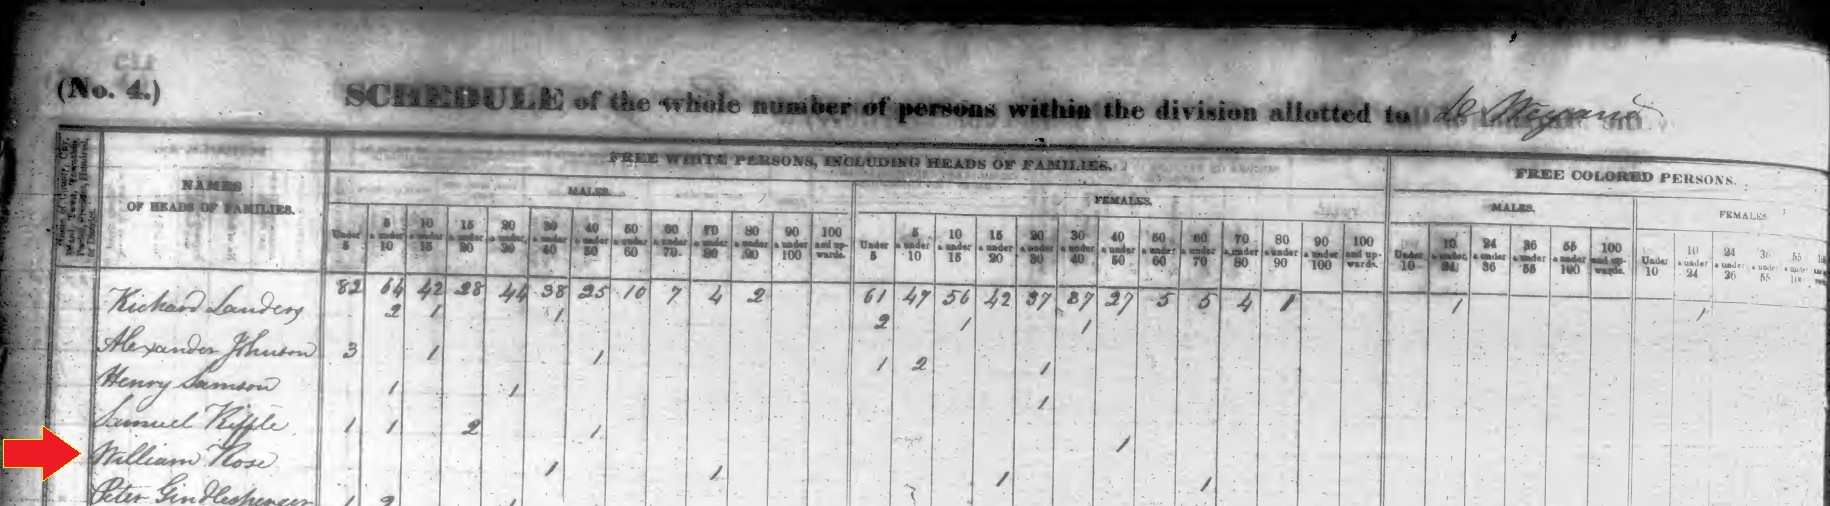 The William Rose household in the 1840 census of Jenner Township, Somerset County, Pennsylvania.